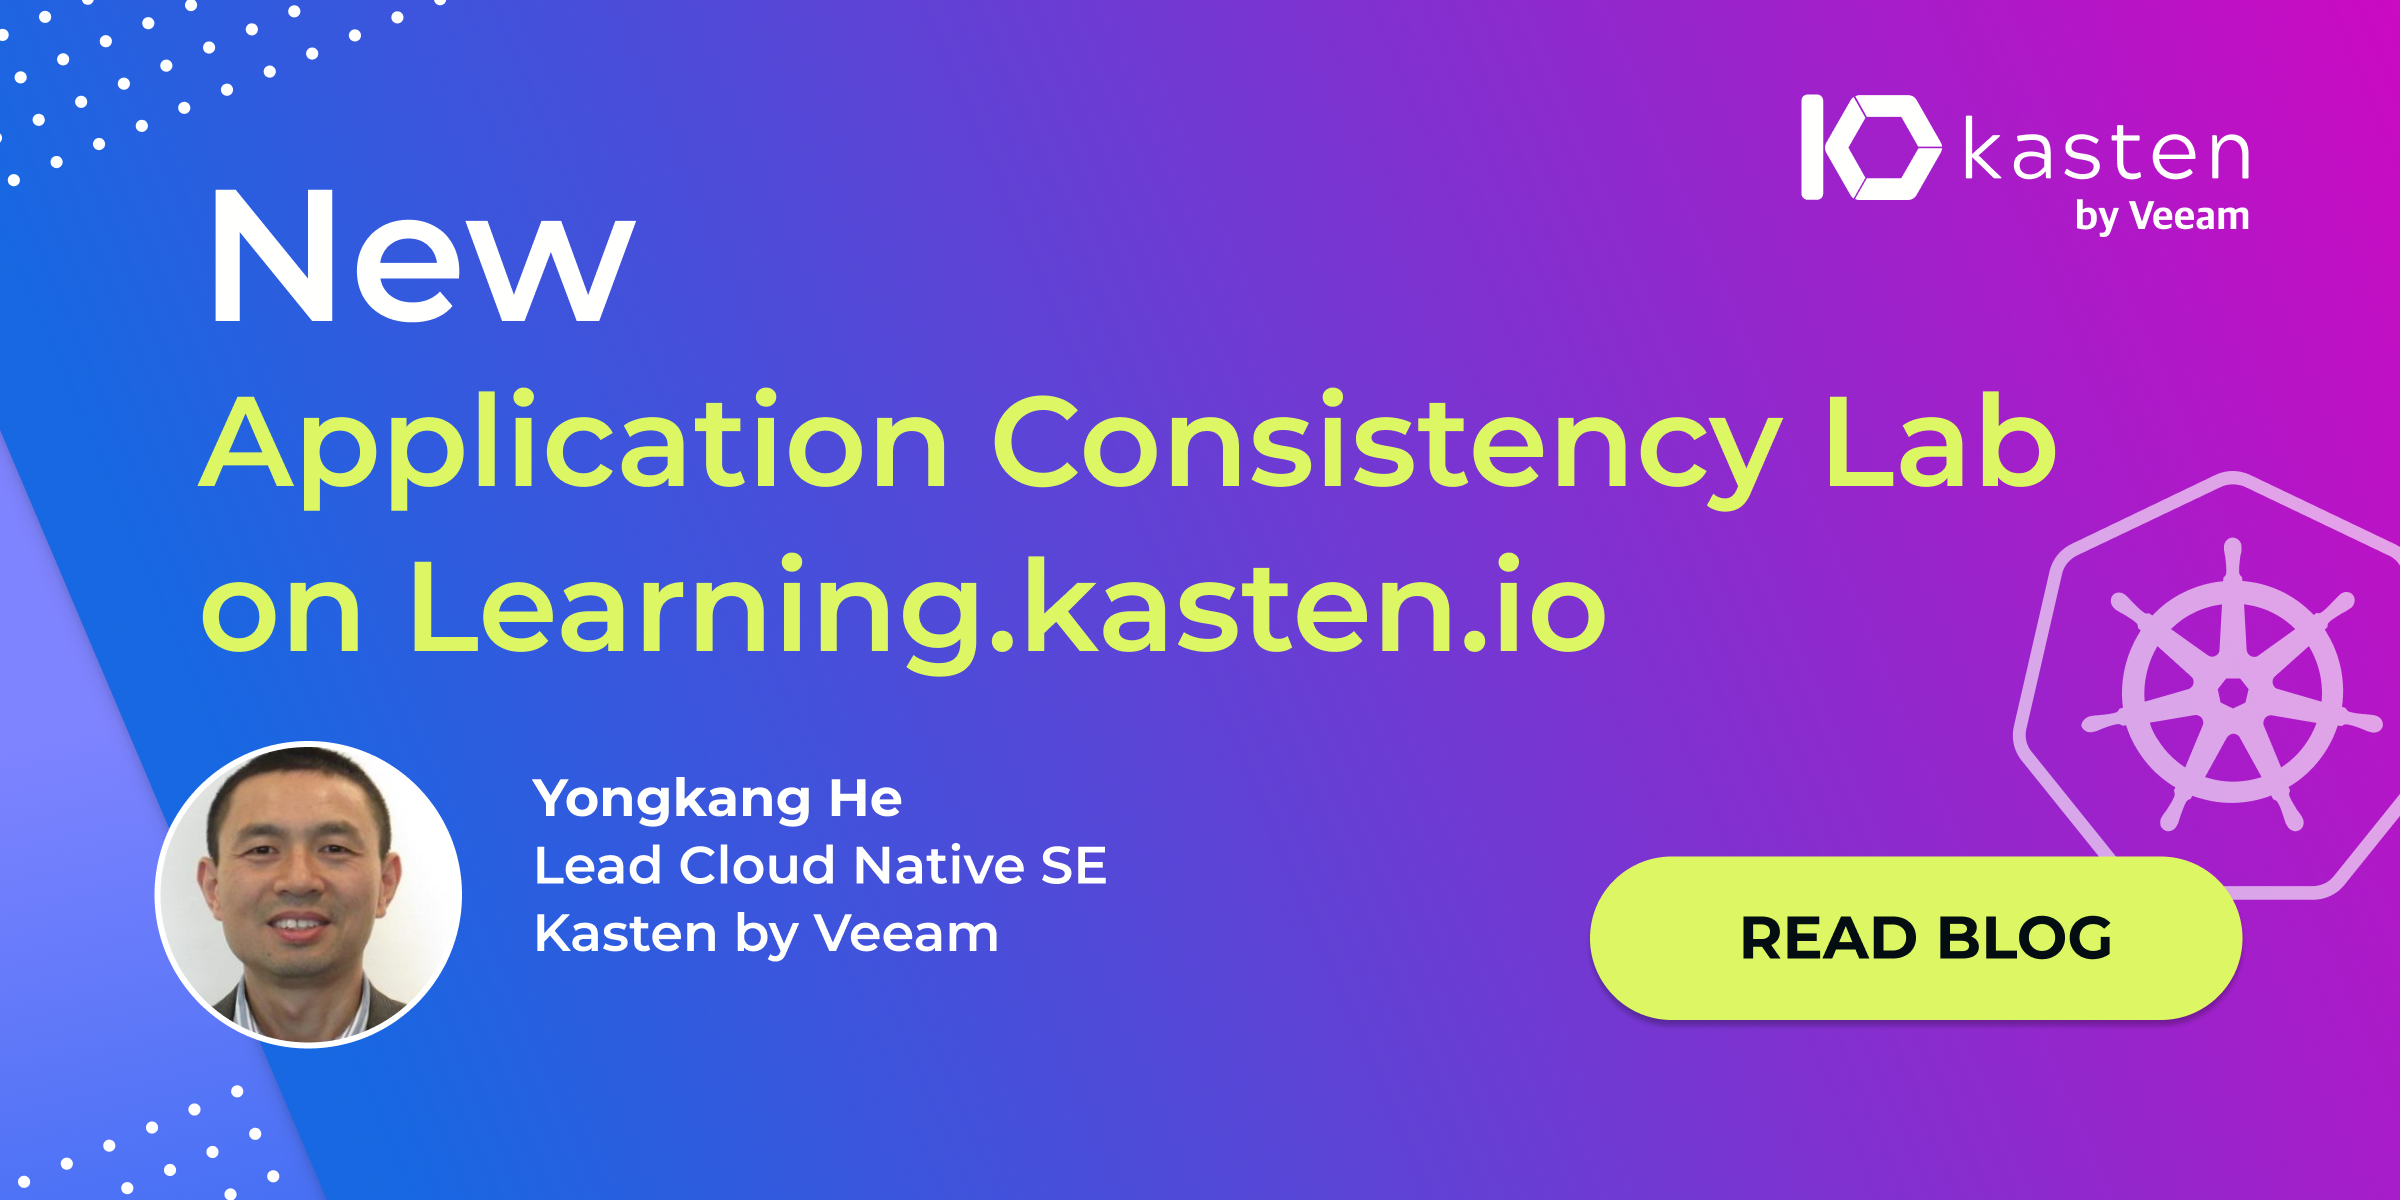 New Application Consistency Lab on Learning.kasten.io